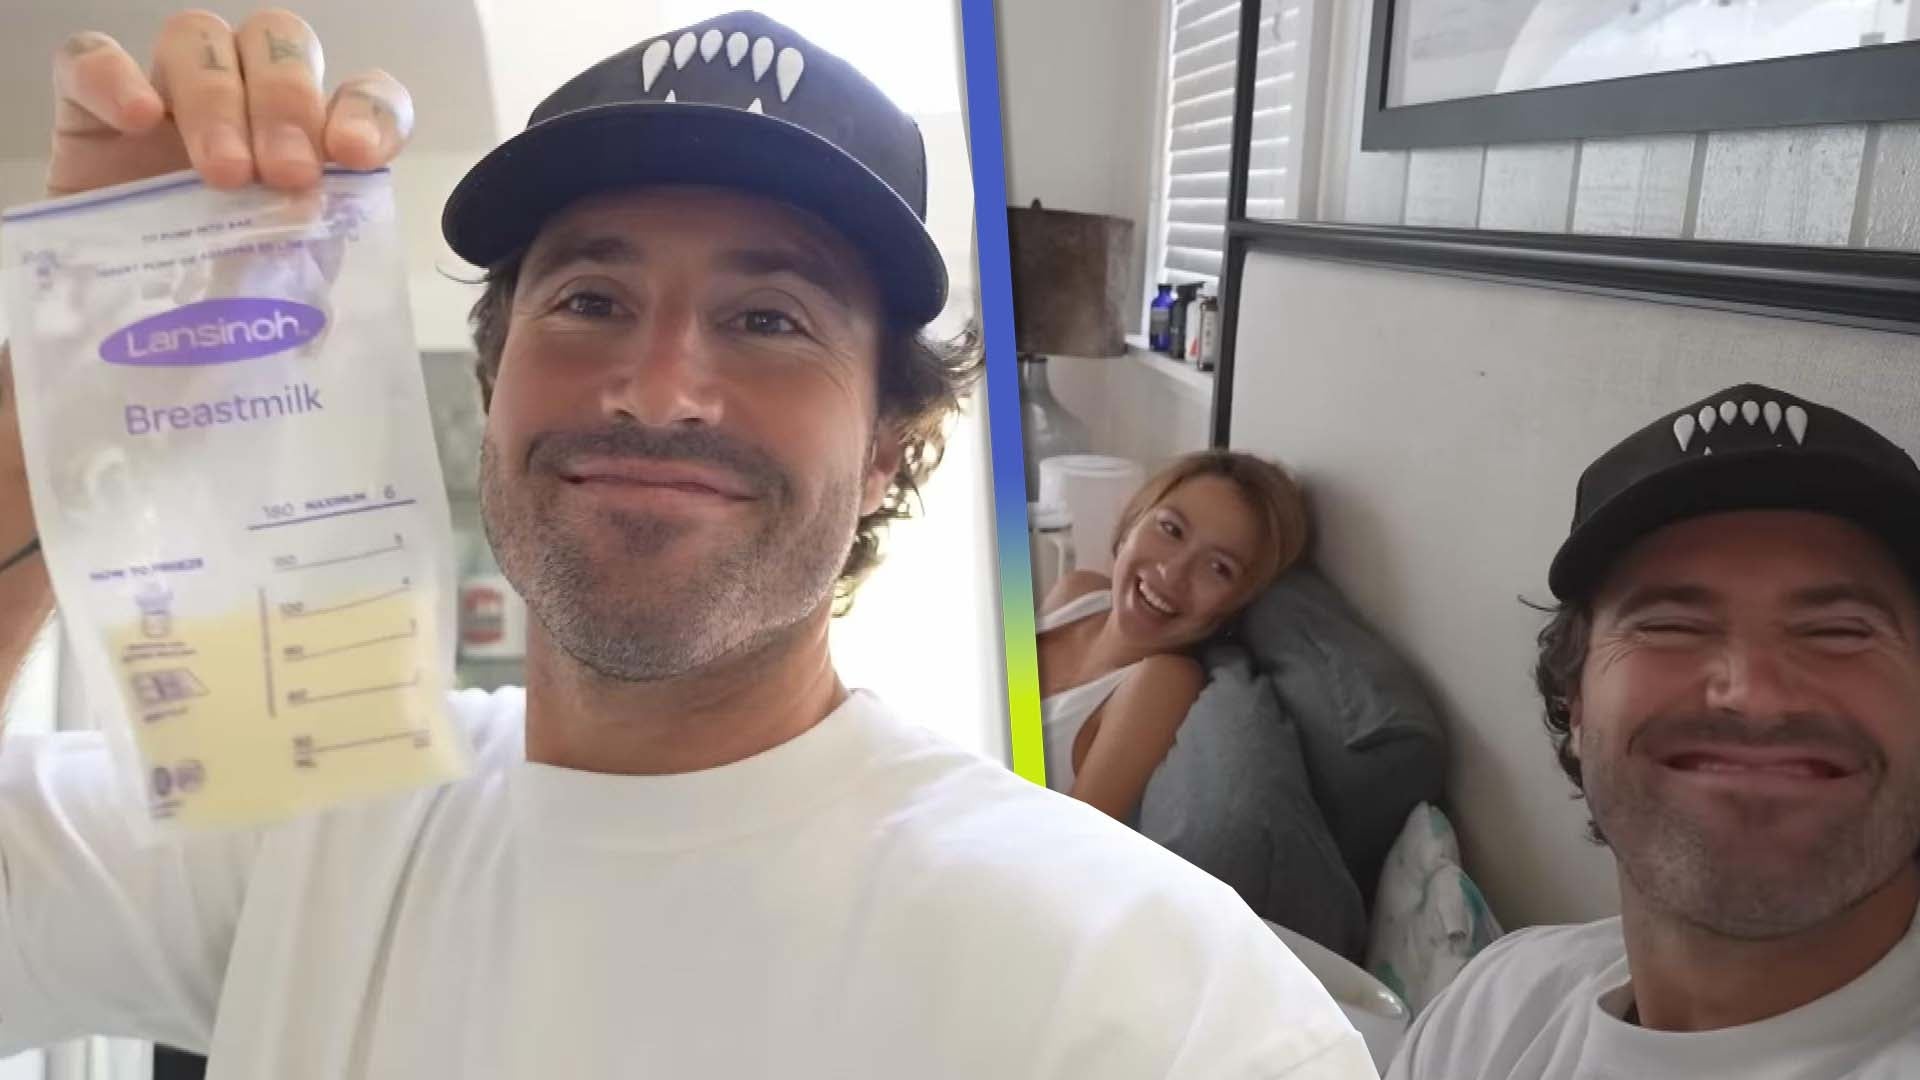 Brody Jenner Makes 'Freaking Delicious' Coffee Using Fiancée's Breast Milk